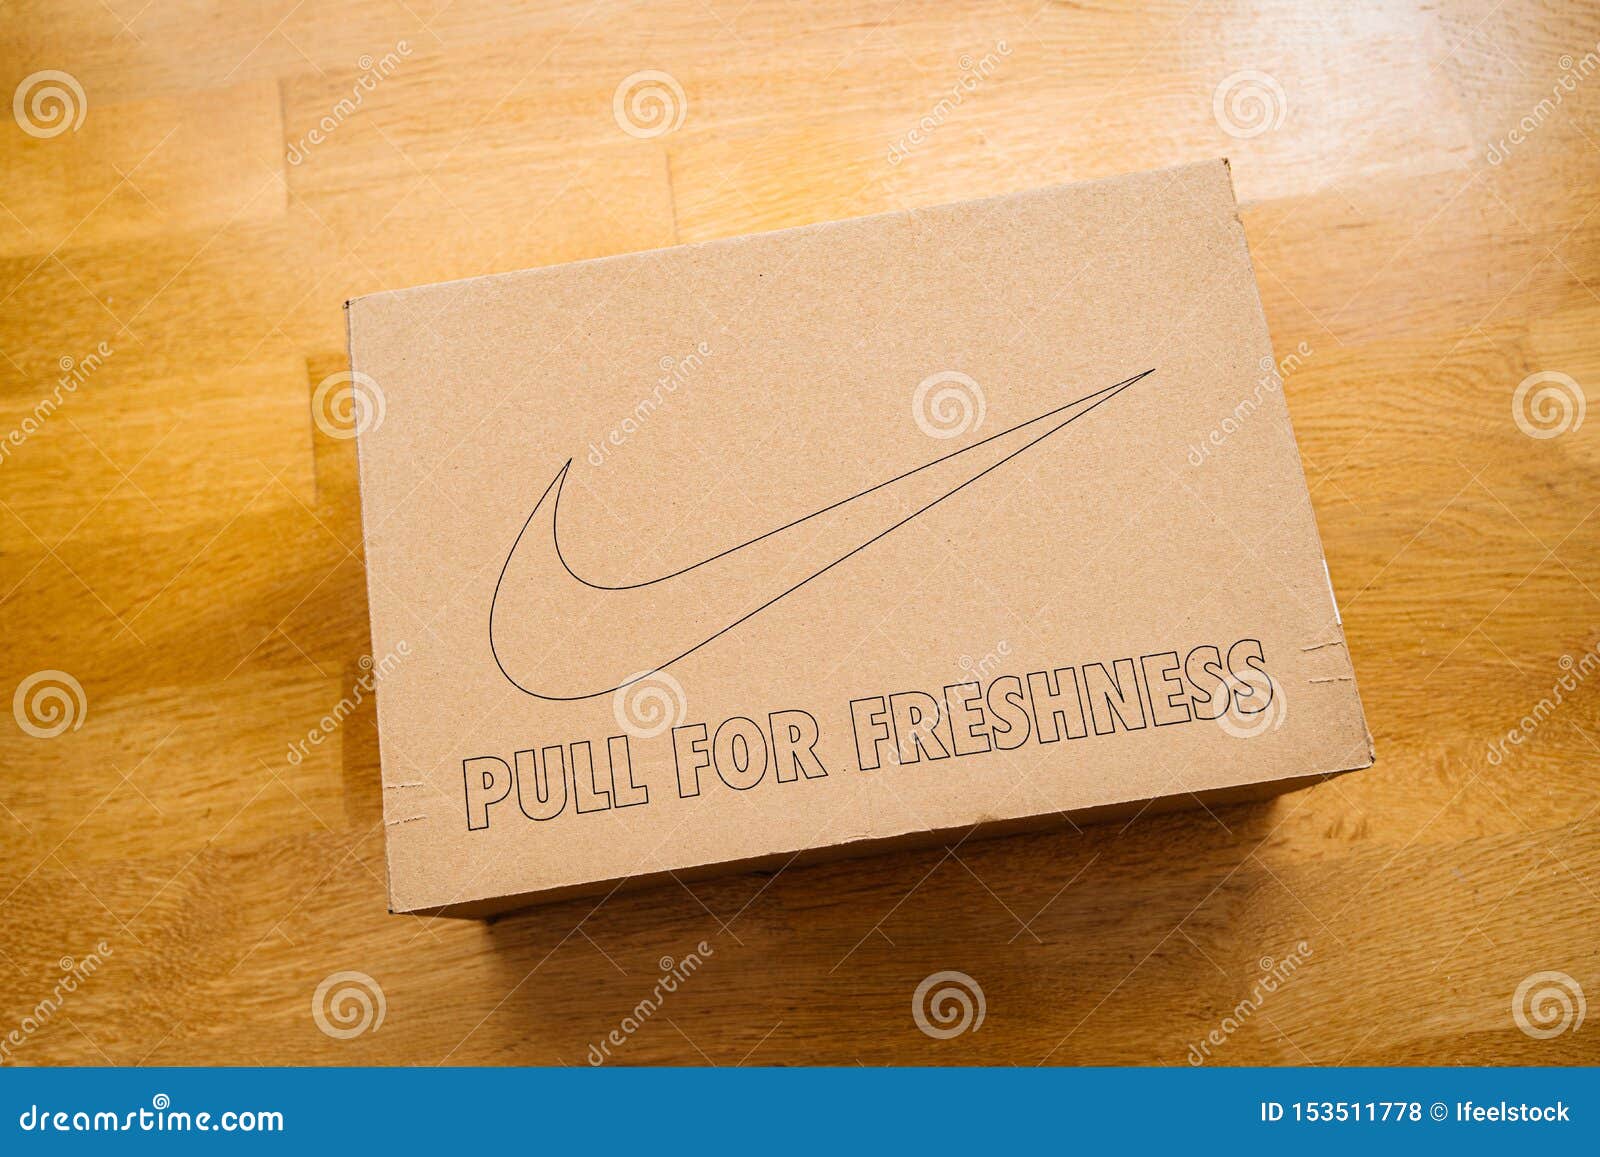 Pull for Freshness and Logotype of Nike on Wooden Floor Stock Photo - Image clothing, fashion: 153511778